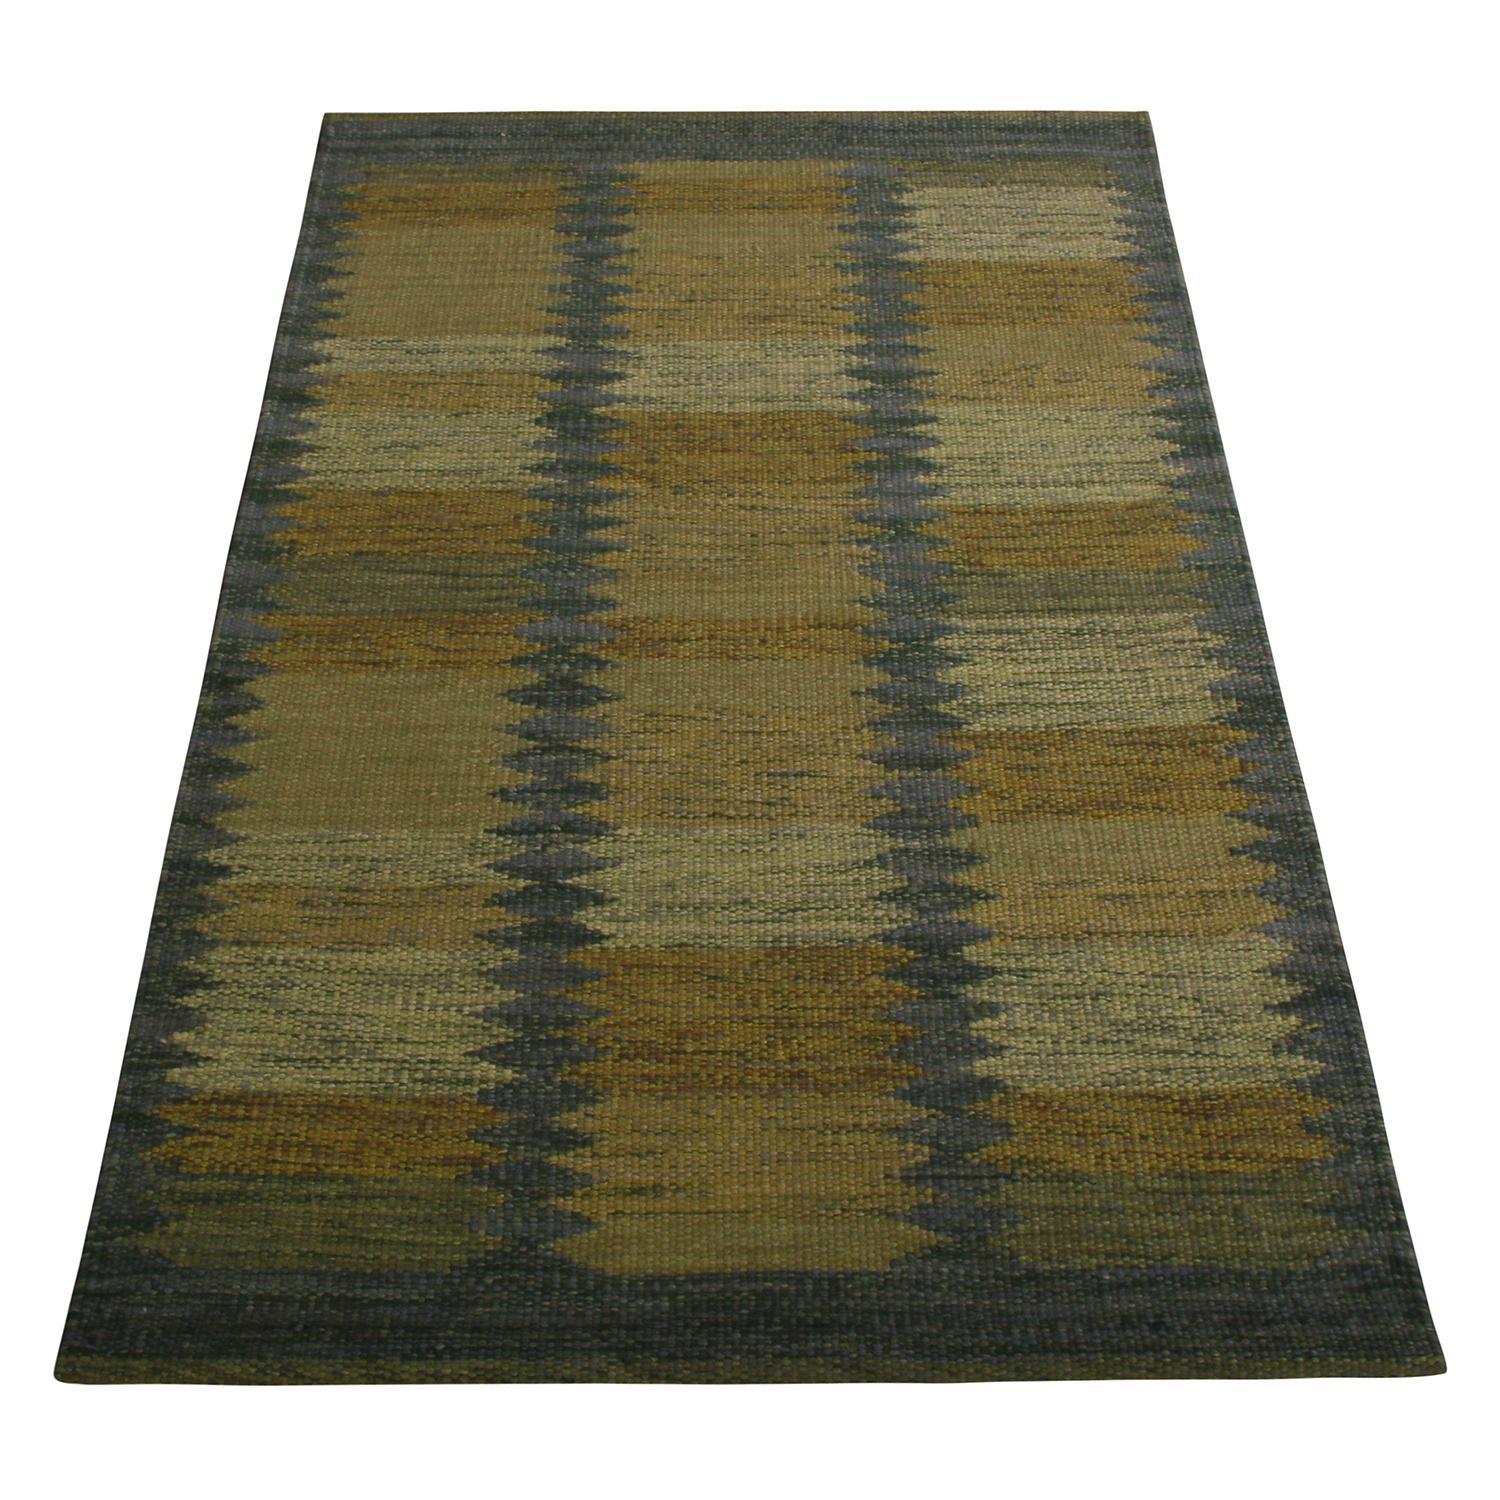 Handwoven in distinguished natural wool with a unique blend of exotic yarns, this modern rug hails from the latest flat-weave additions to Rug & Kilim’s Scandinavian Kilim collection, a celebration of Swedish modernism with new large-scale geometry